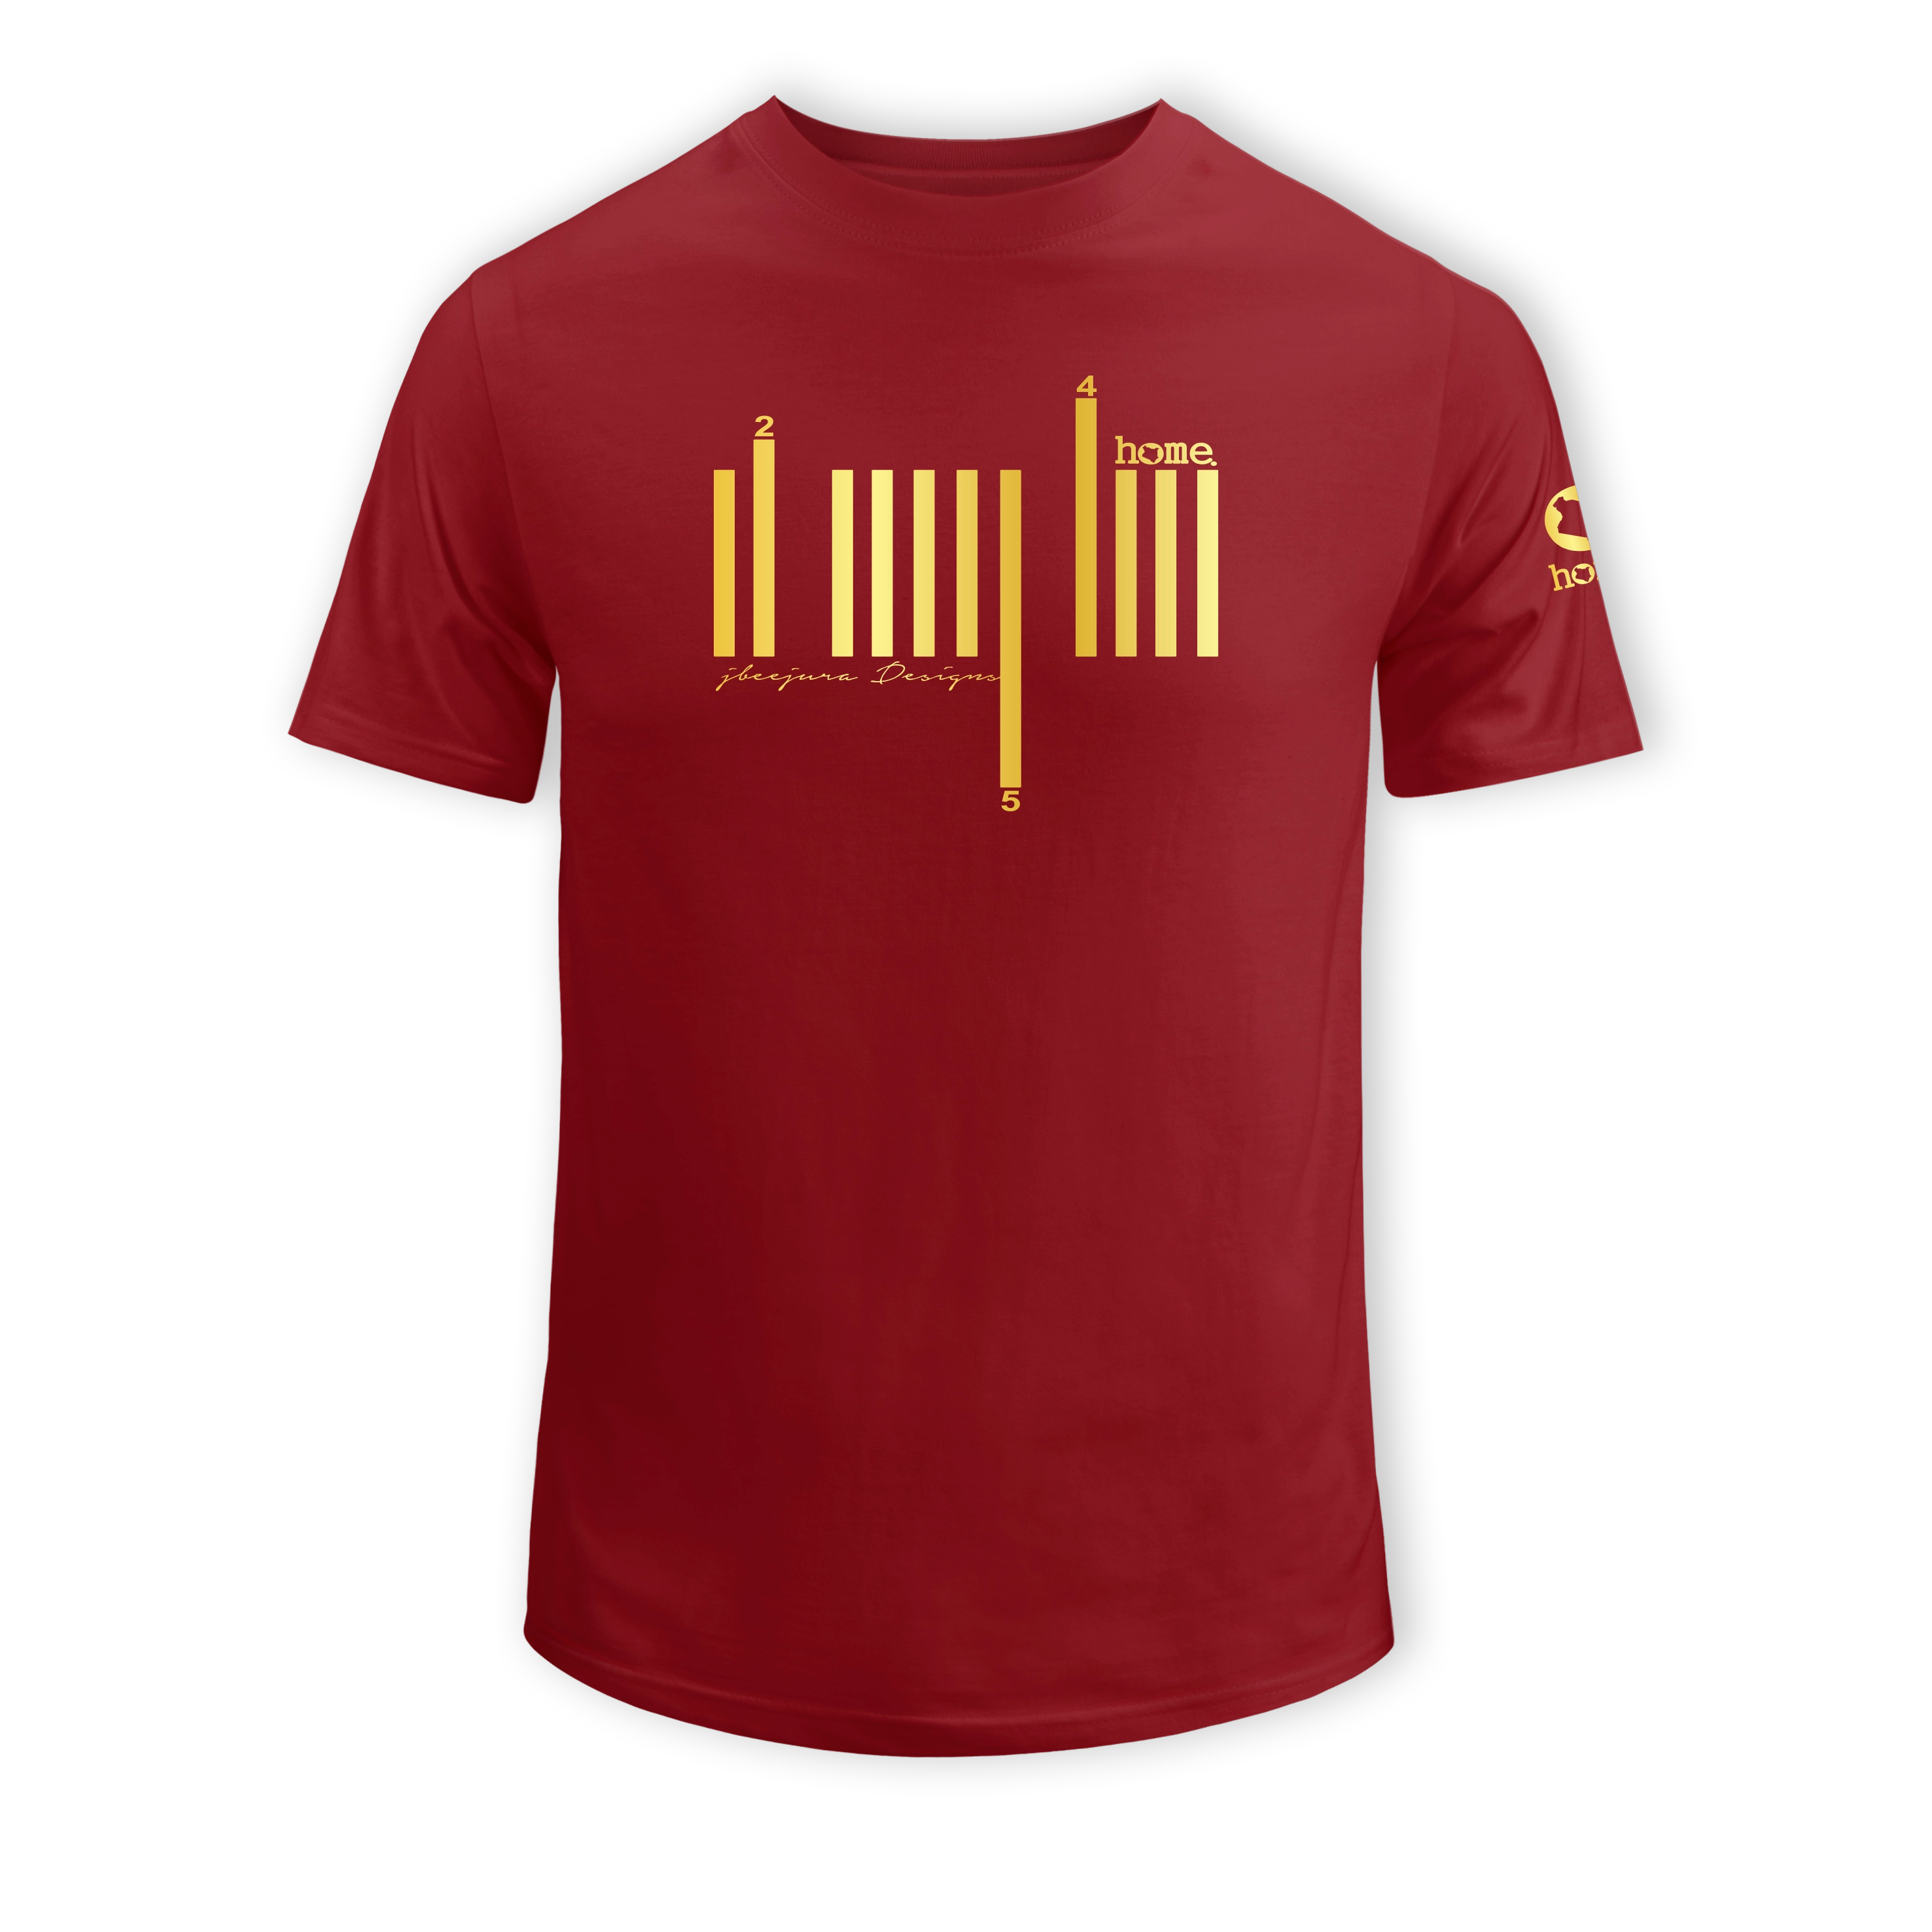 home_254 SHORT-SLEEVED MAROON RED T-SHIRT WITH A GOLD BARS PRINT – COTTON PLUS FABRIC